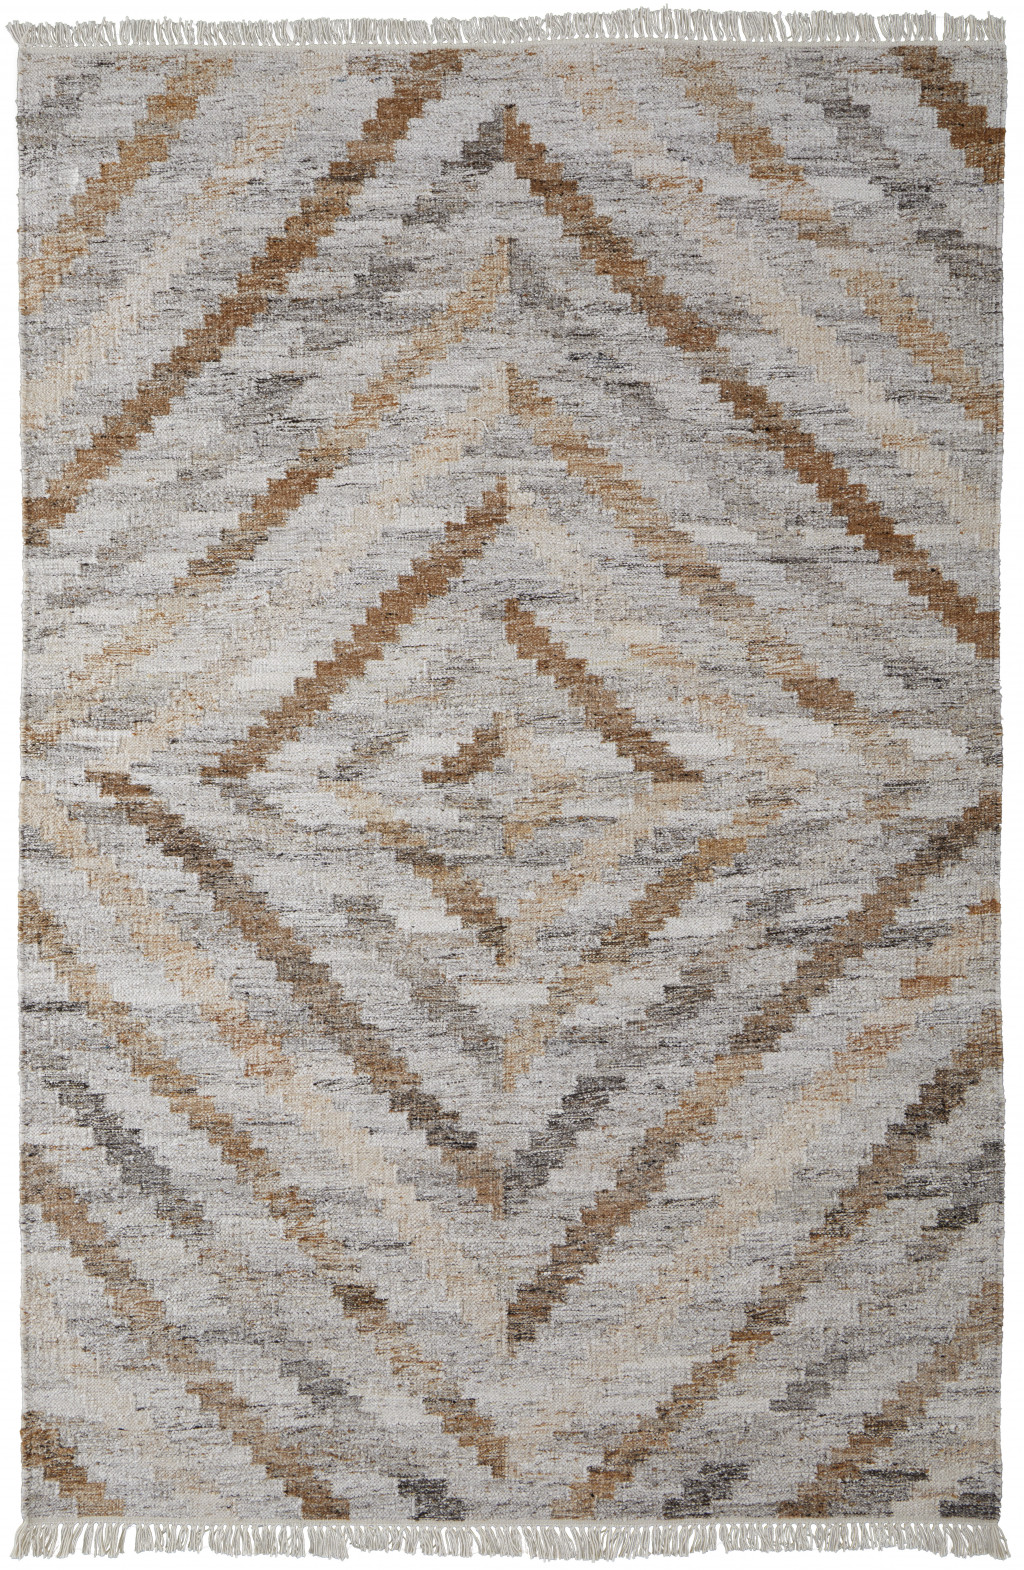 9' X 12' Ivory Gray And Tan Geometric Hand Woven Stain Resistant Area Rug With Fringe-512425-1